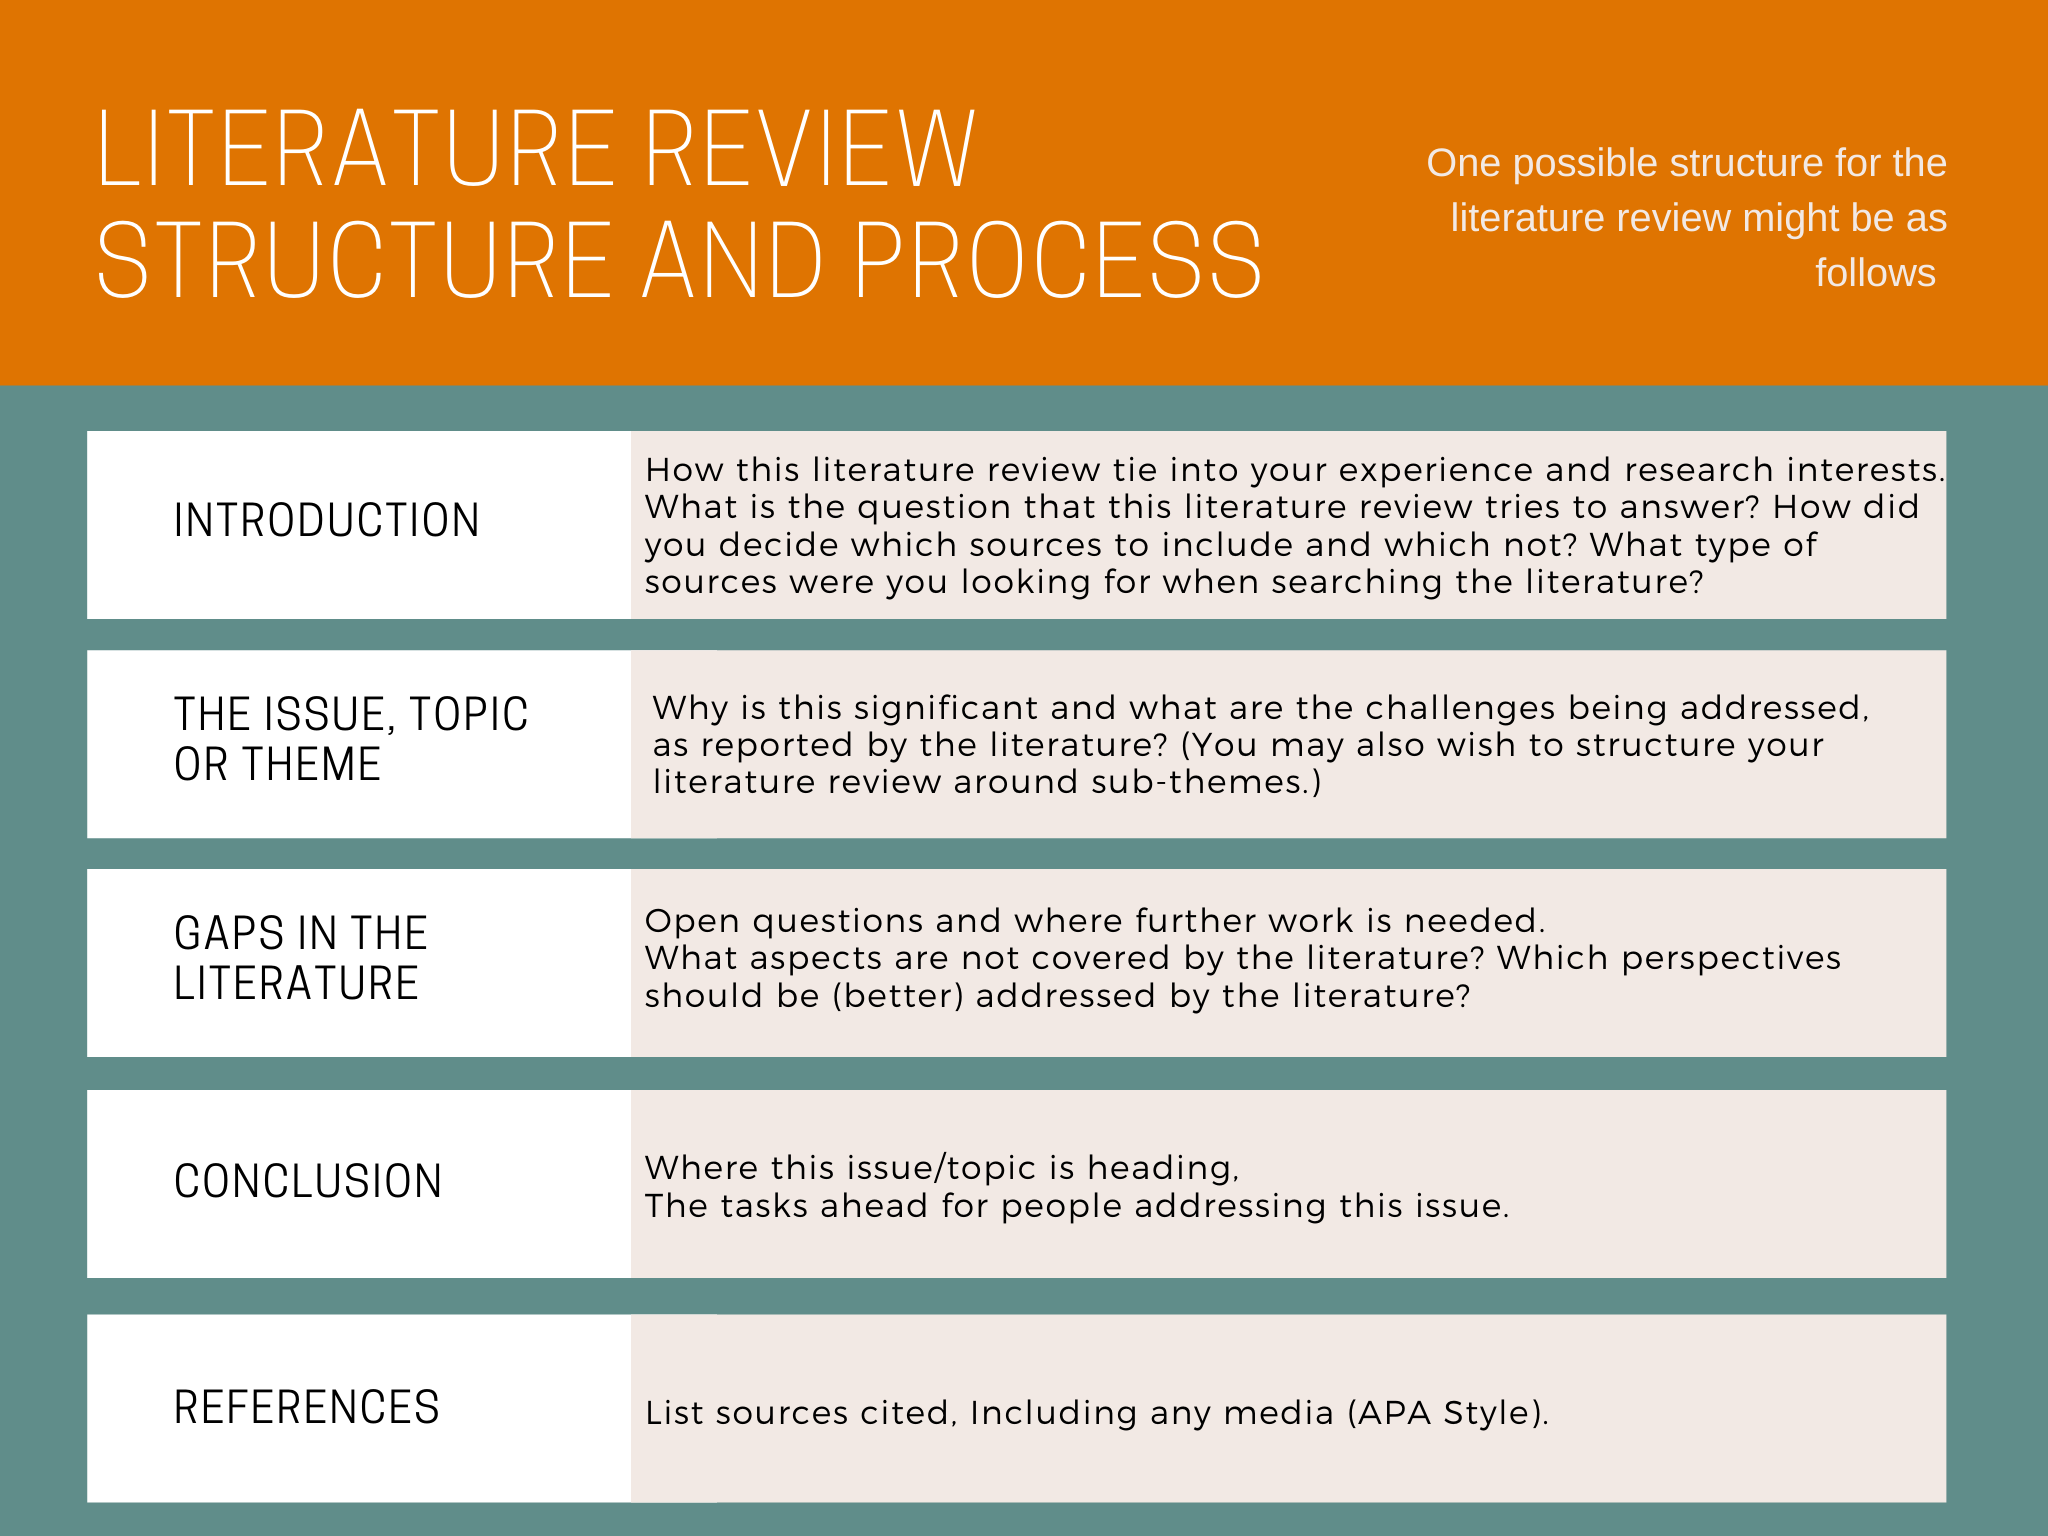 5 sources of literature review in research